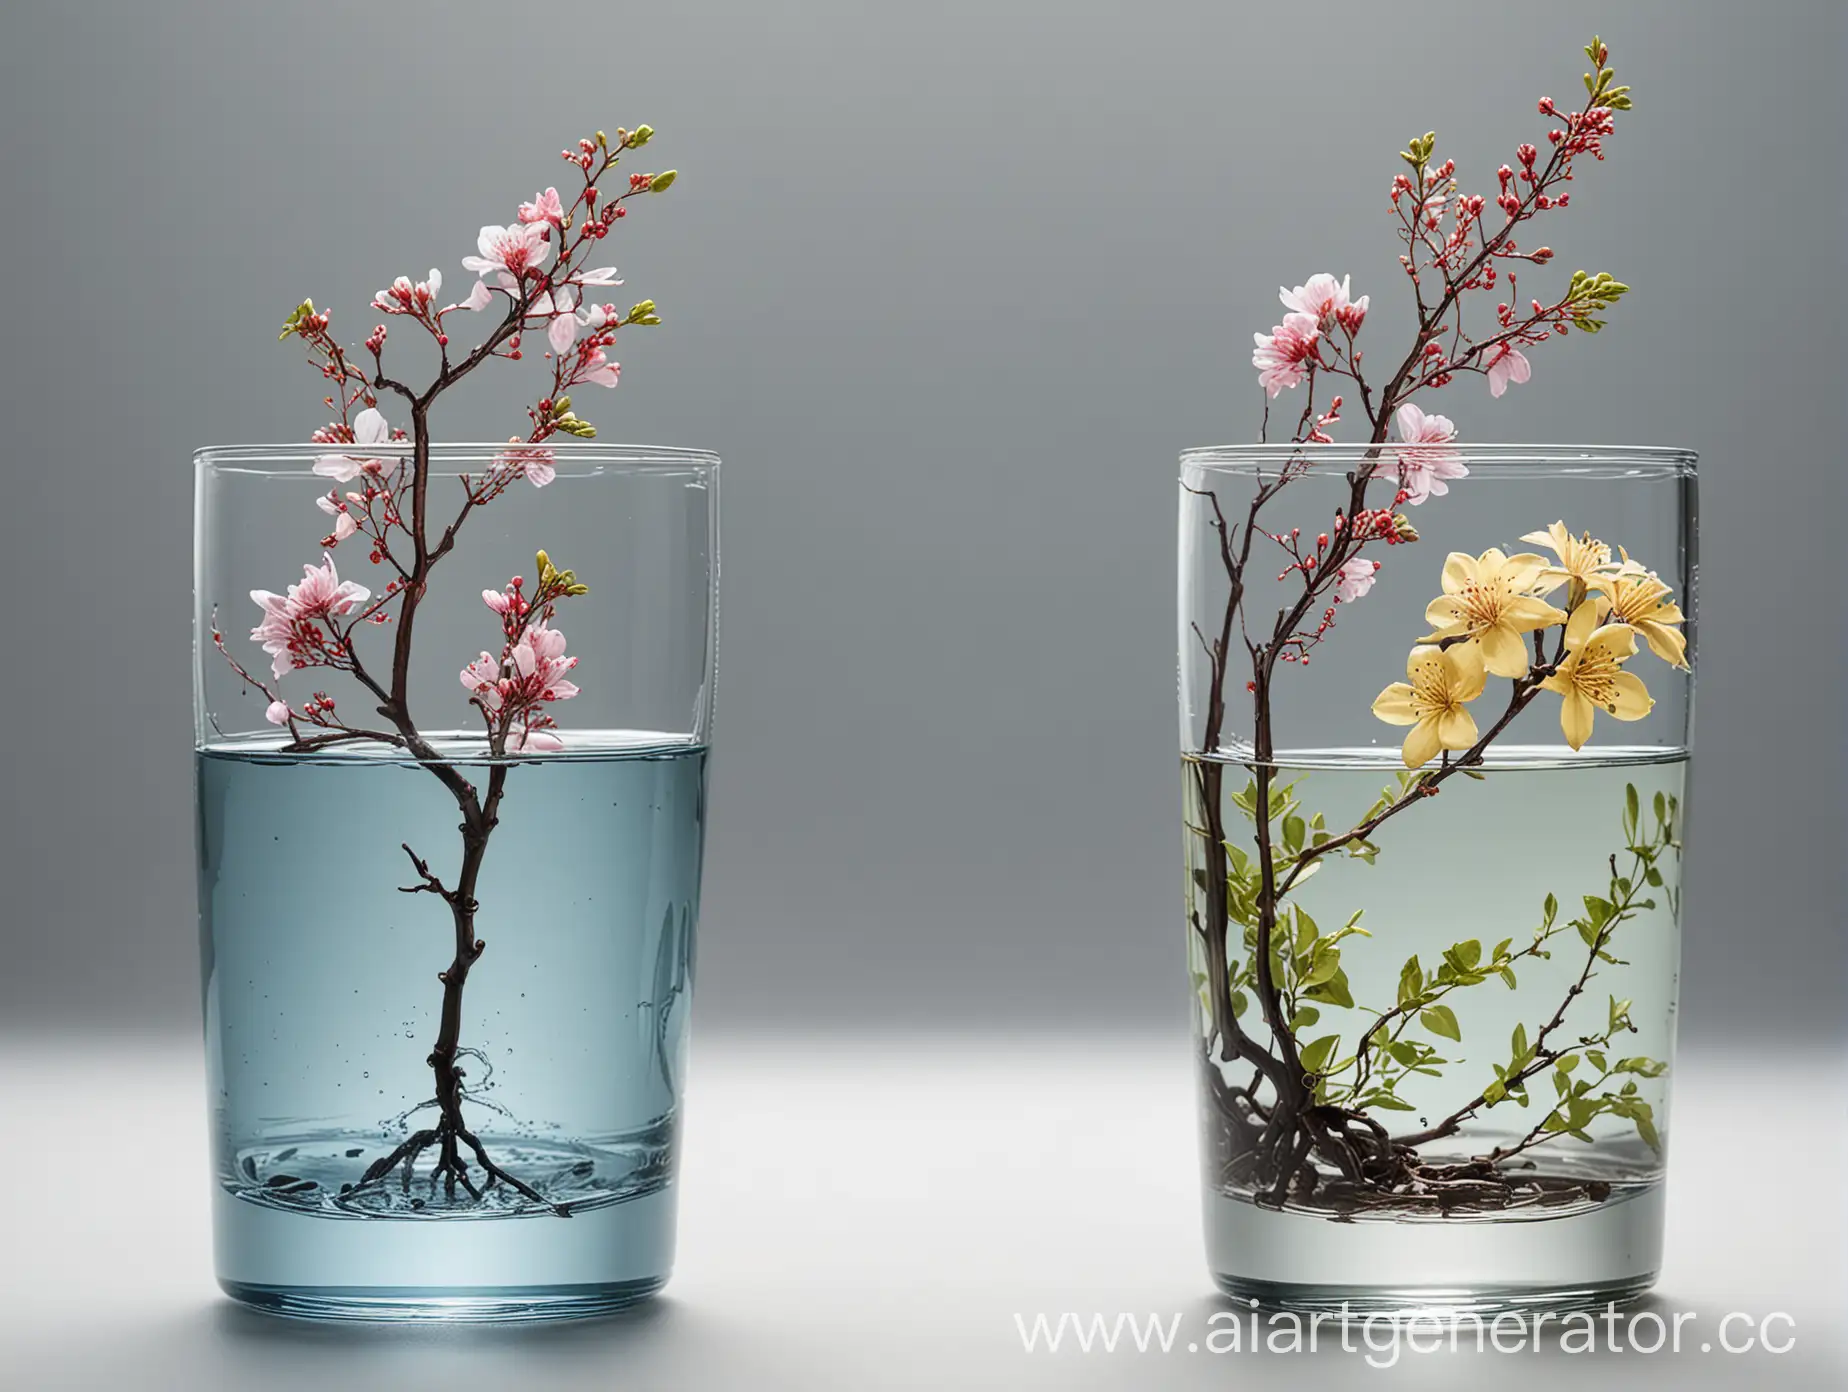 Contrasting-Floral-Growth-Blooming-vs-Wilted-Branches-in-Glass-Vases